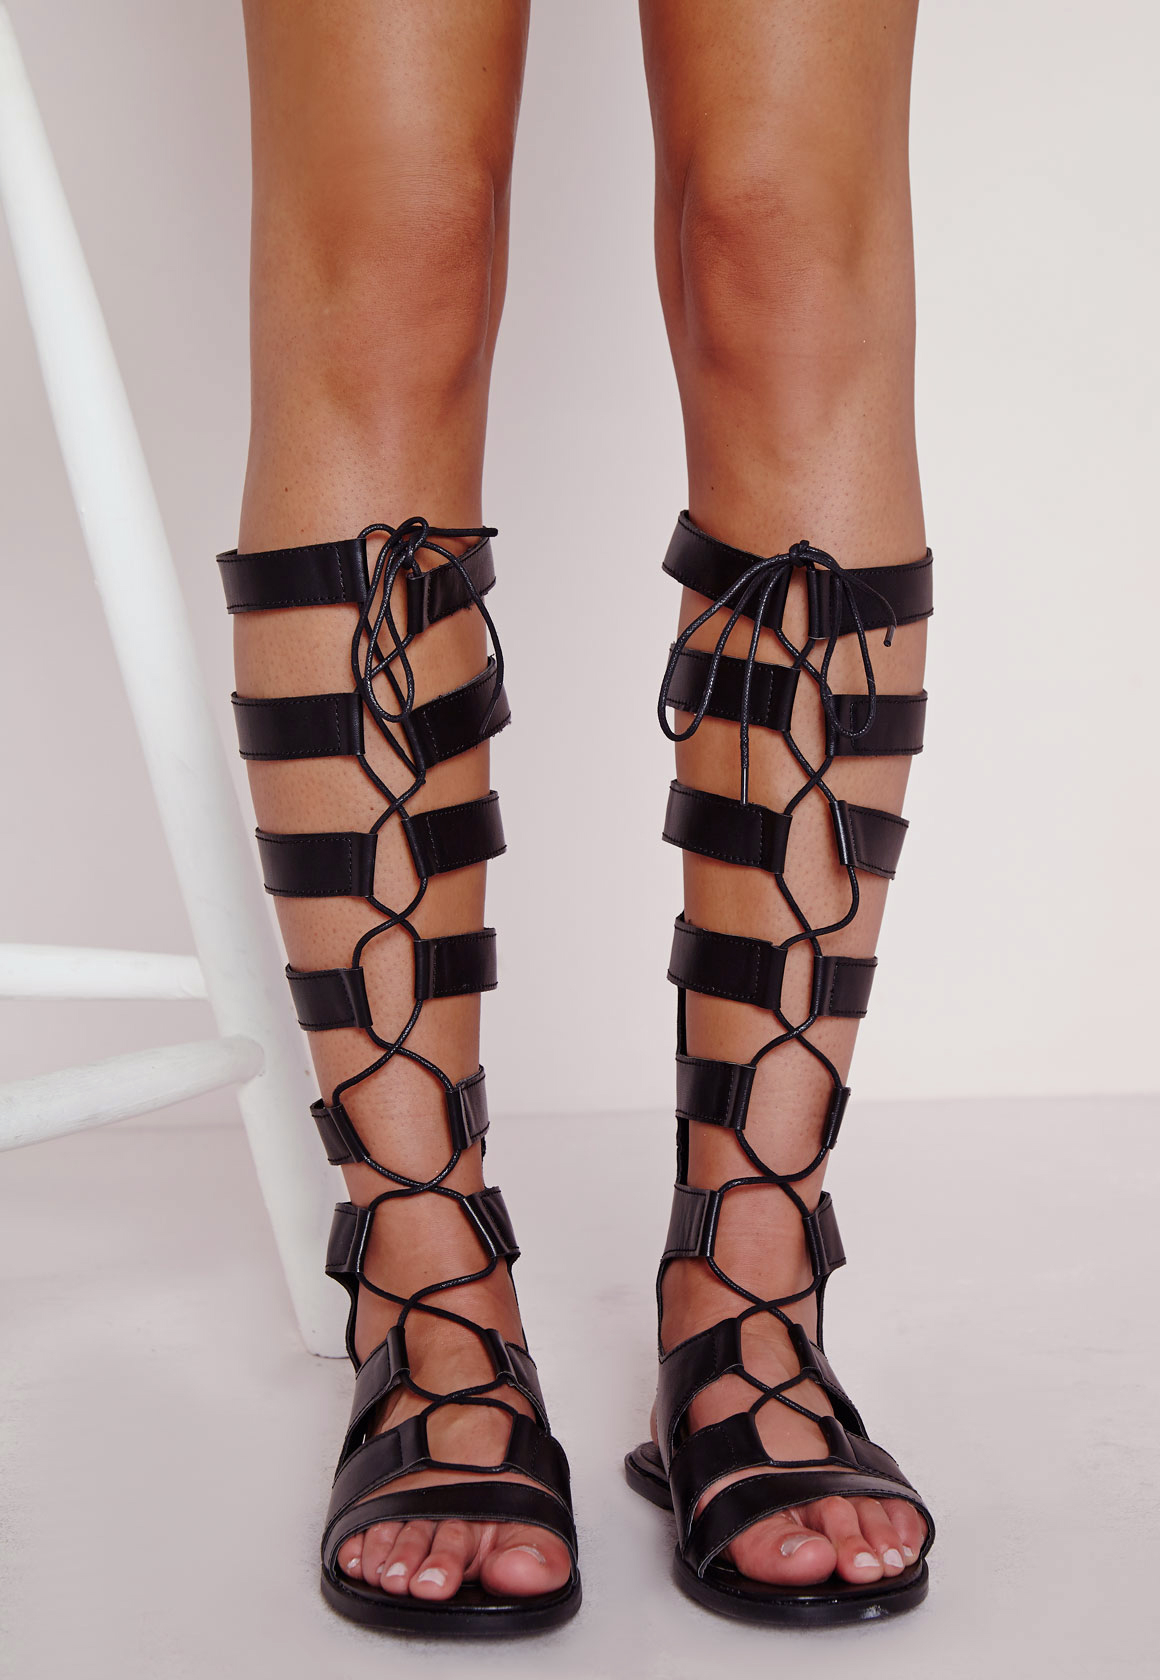 Missguided Lace Up Knee  High  Flat Gladiator  Sandals  Black 